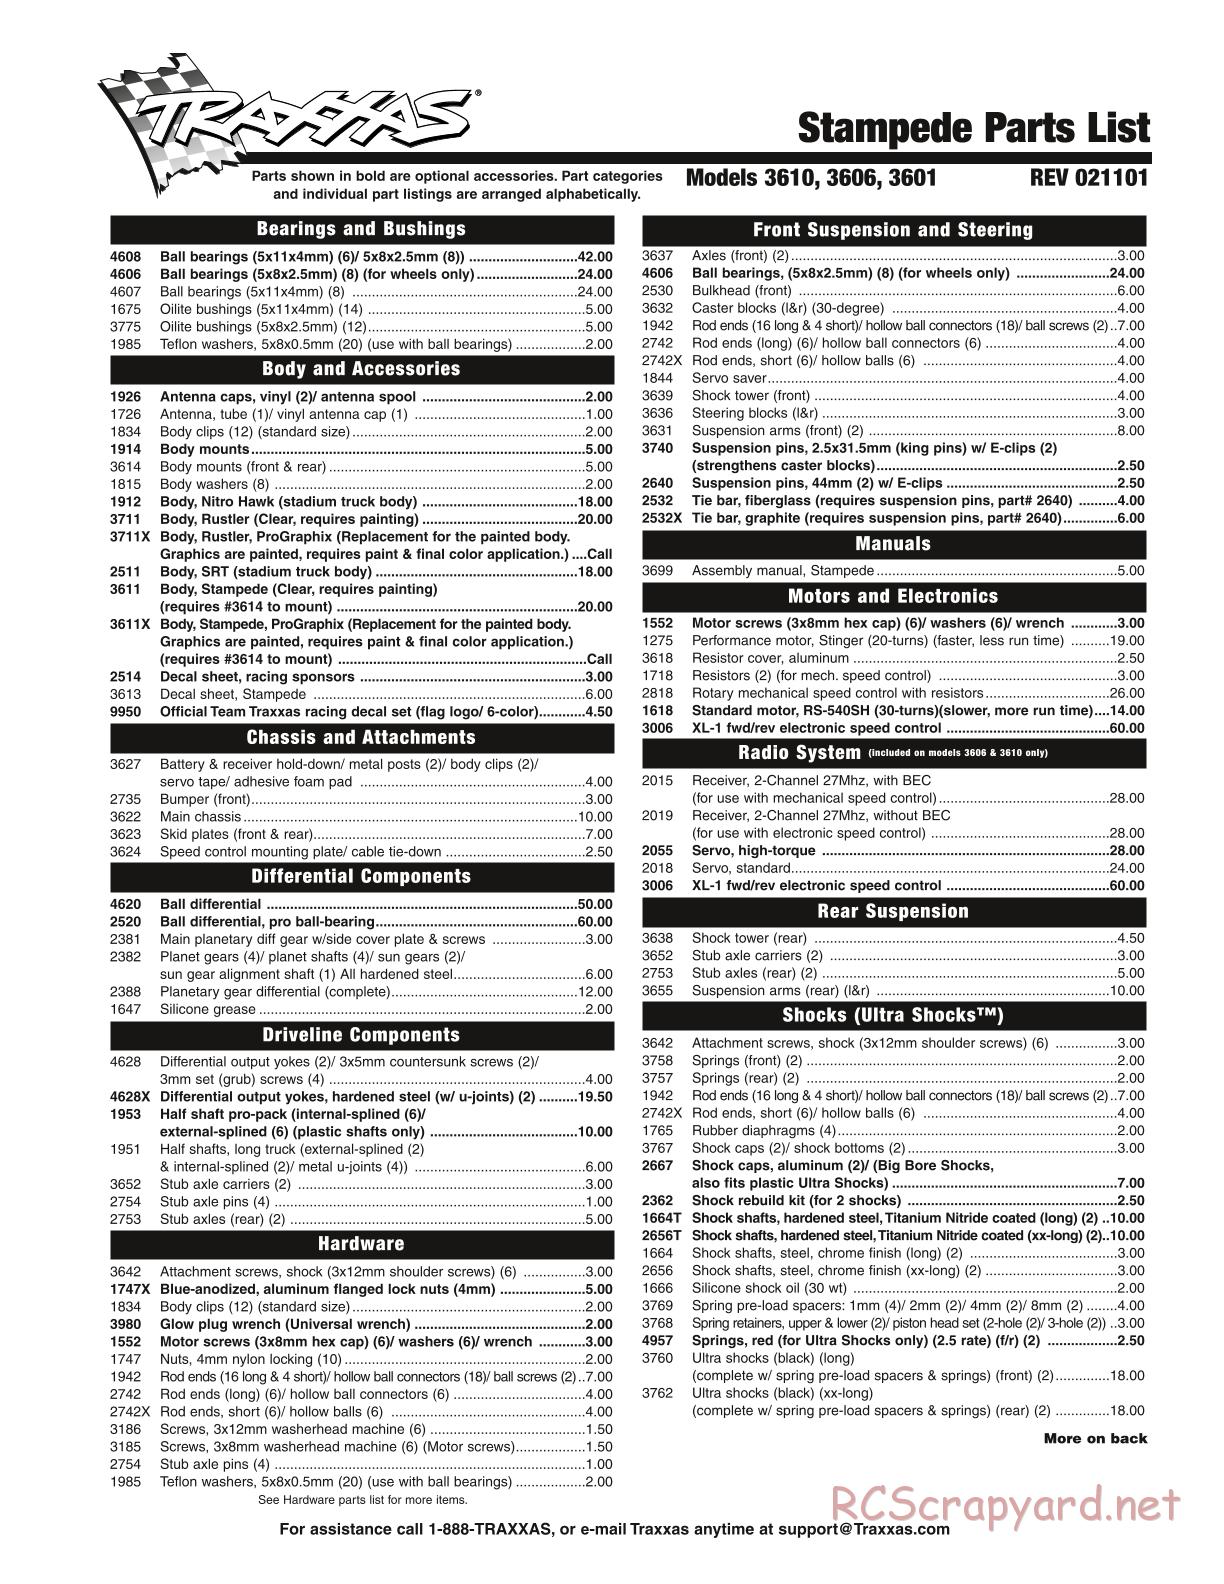 Traxxas - Stampede XL-1 - Parts List - Page 1